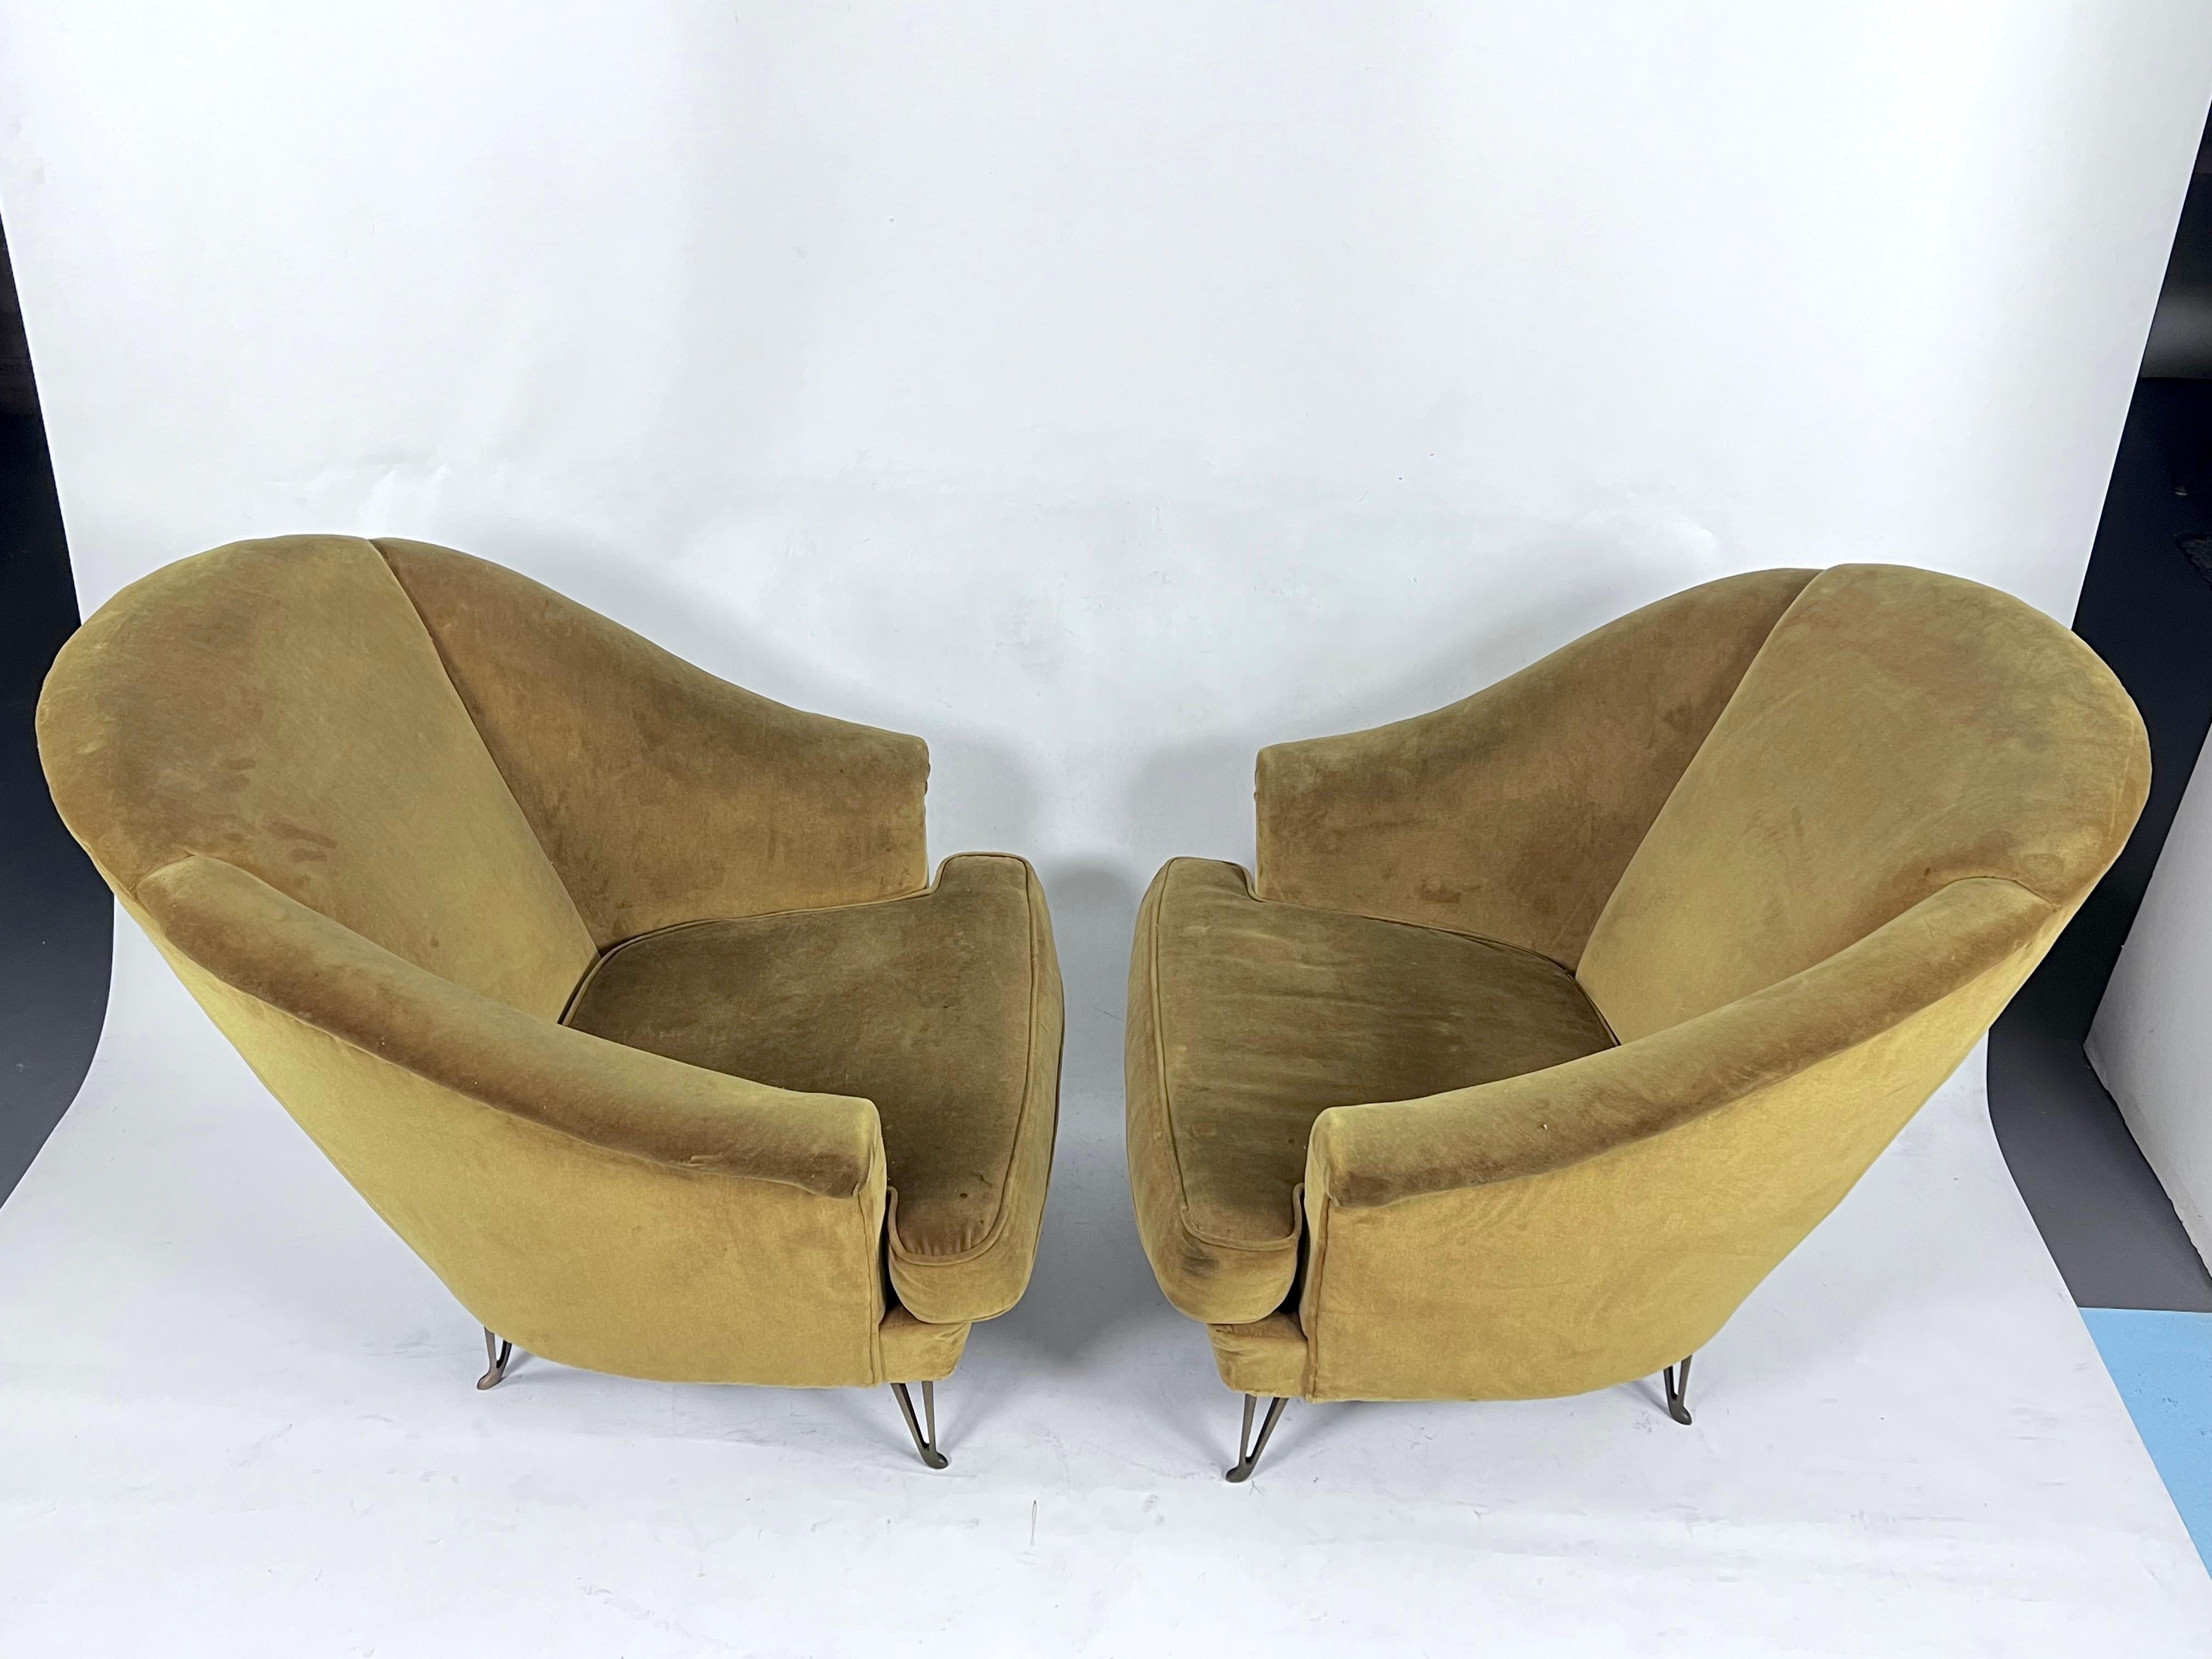 Rare pair of Labeled Isa Bergamo armchairs with original velvet and unaltered vintage condition with normal trace of age and use. Designed in the style of Gio Ponti, there are the manufacturing labels. To be noticed the rare metal tapered legs and